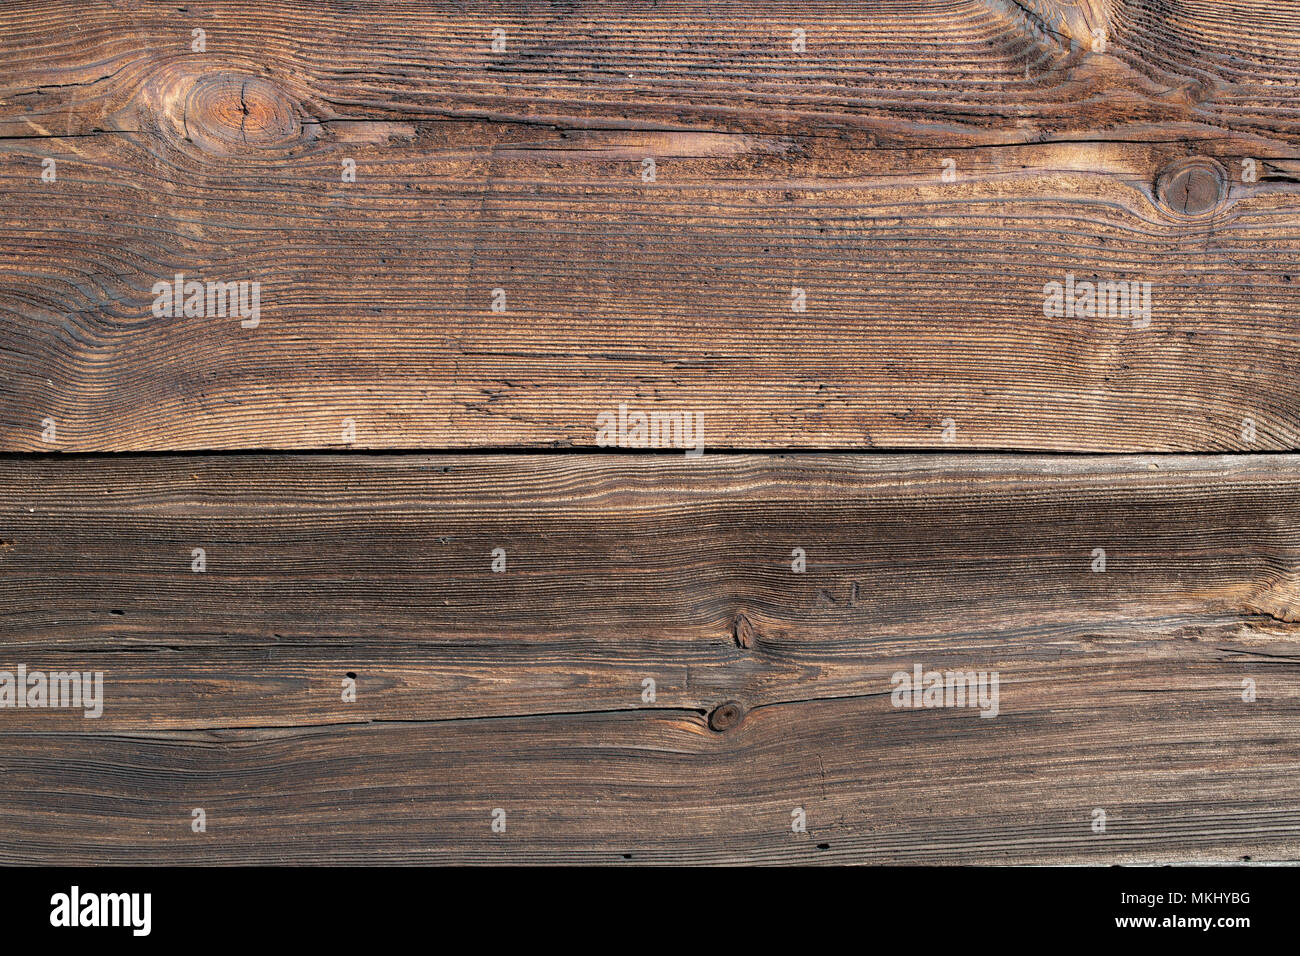 Old wood structure, wood pattern, plank, board. 200 years old wooden wall. Sharp, good visible growth rings, parallel lines and curves. Stock Photo